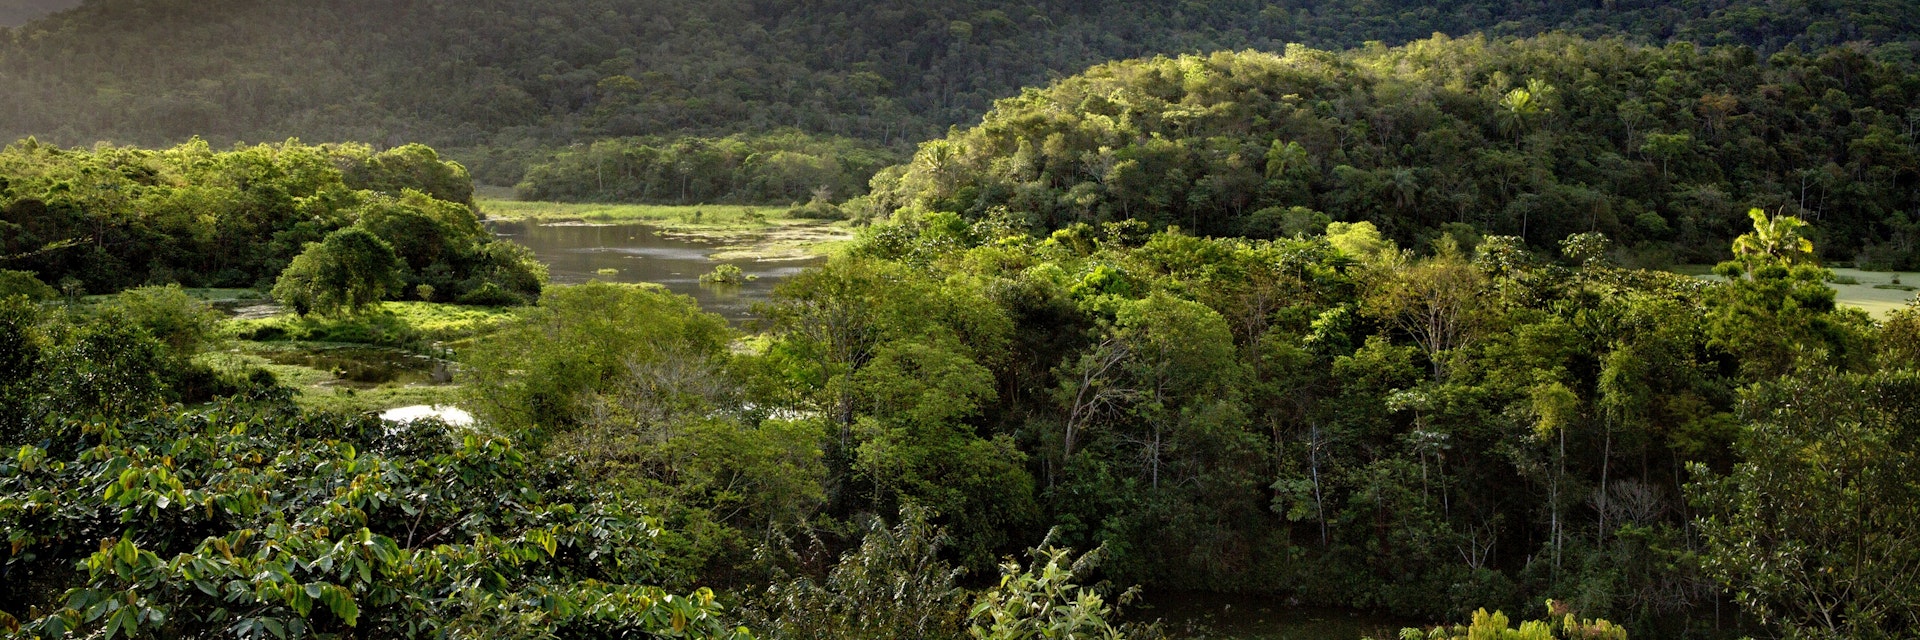 Overview of rainforest regrowth and wetlands.